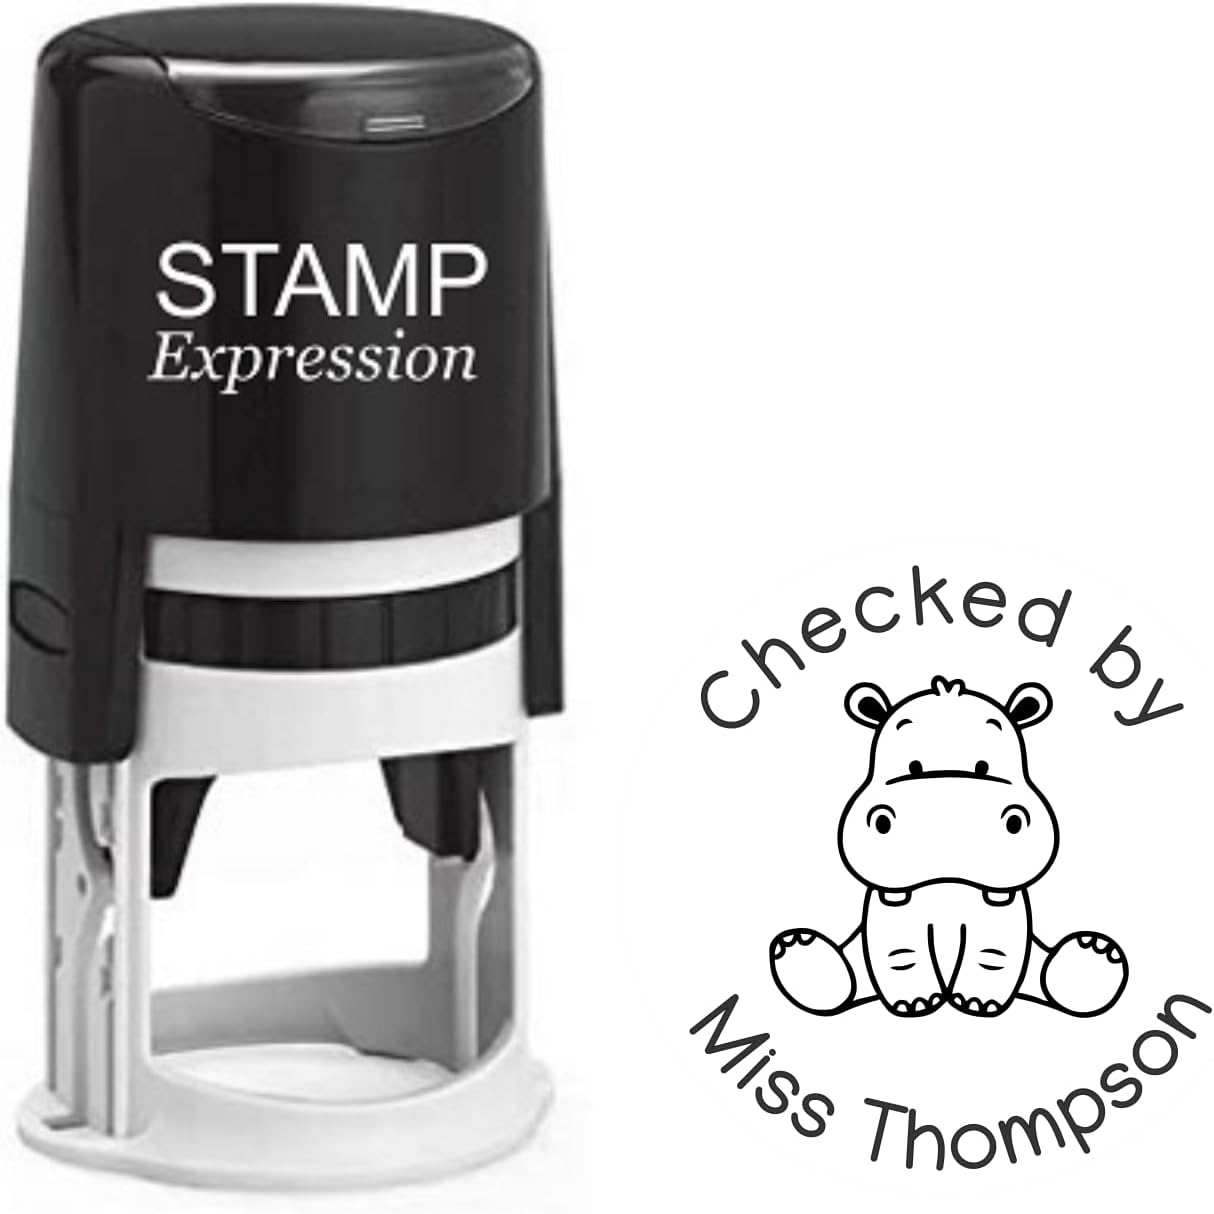 Checked by Little Hippo Teacher Custom Stamp for Classroom - Self Inking. Personalized Rubber Stamp with Lines of Text (SH-76224)